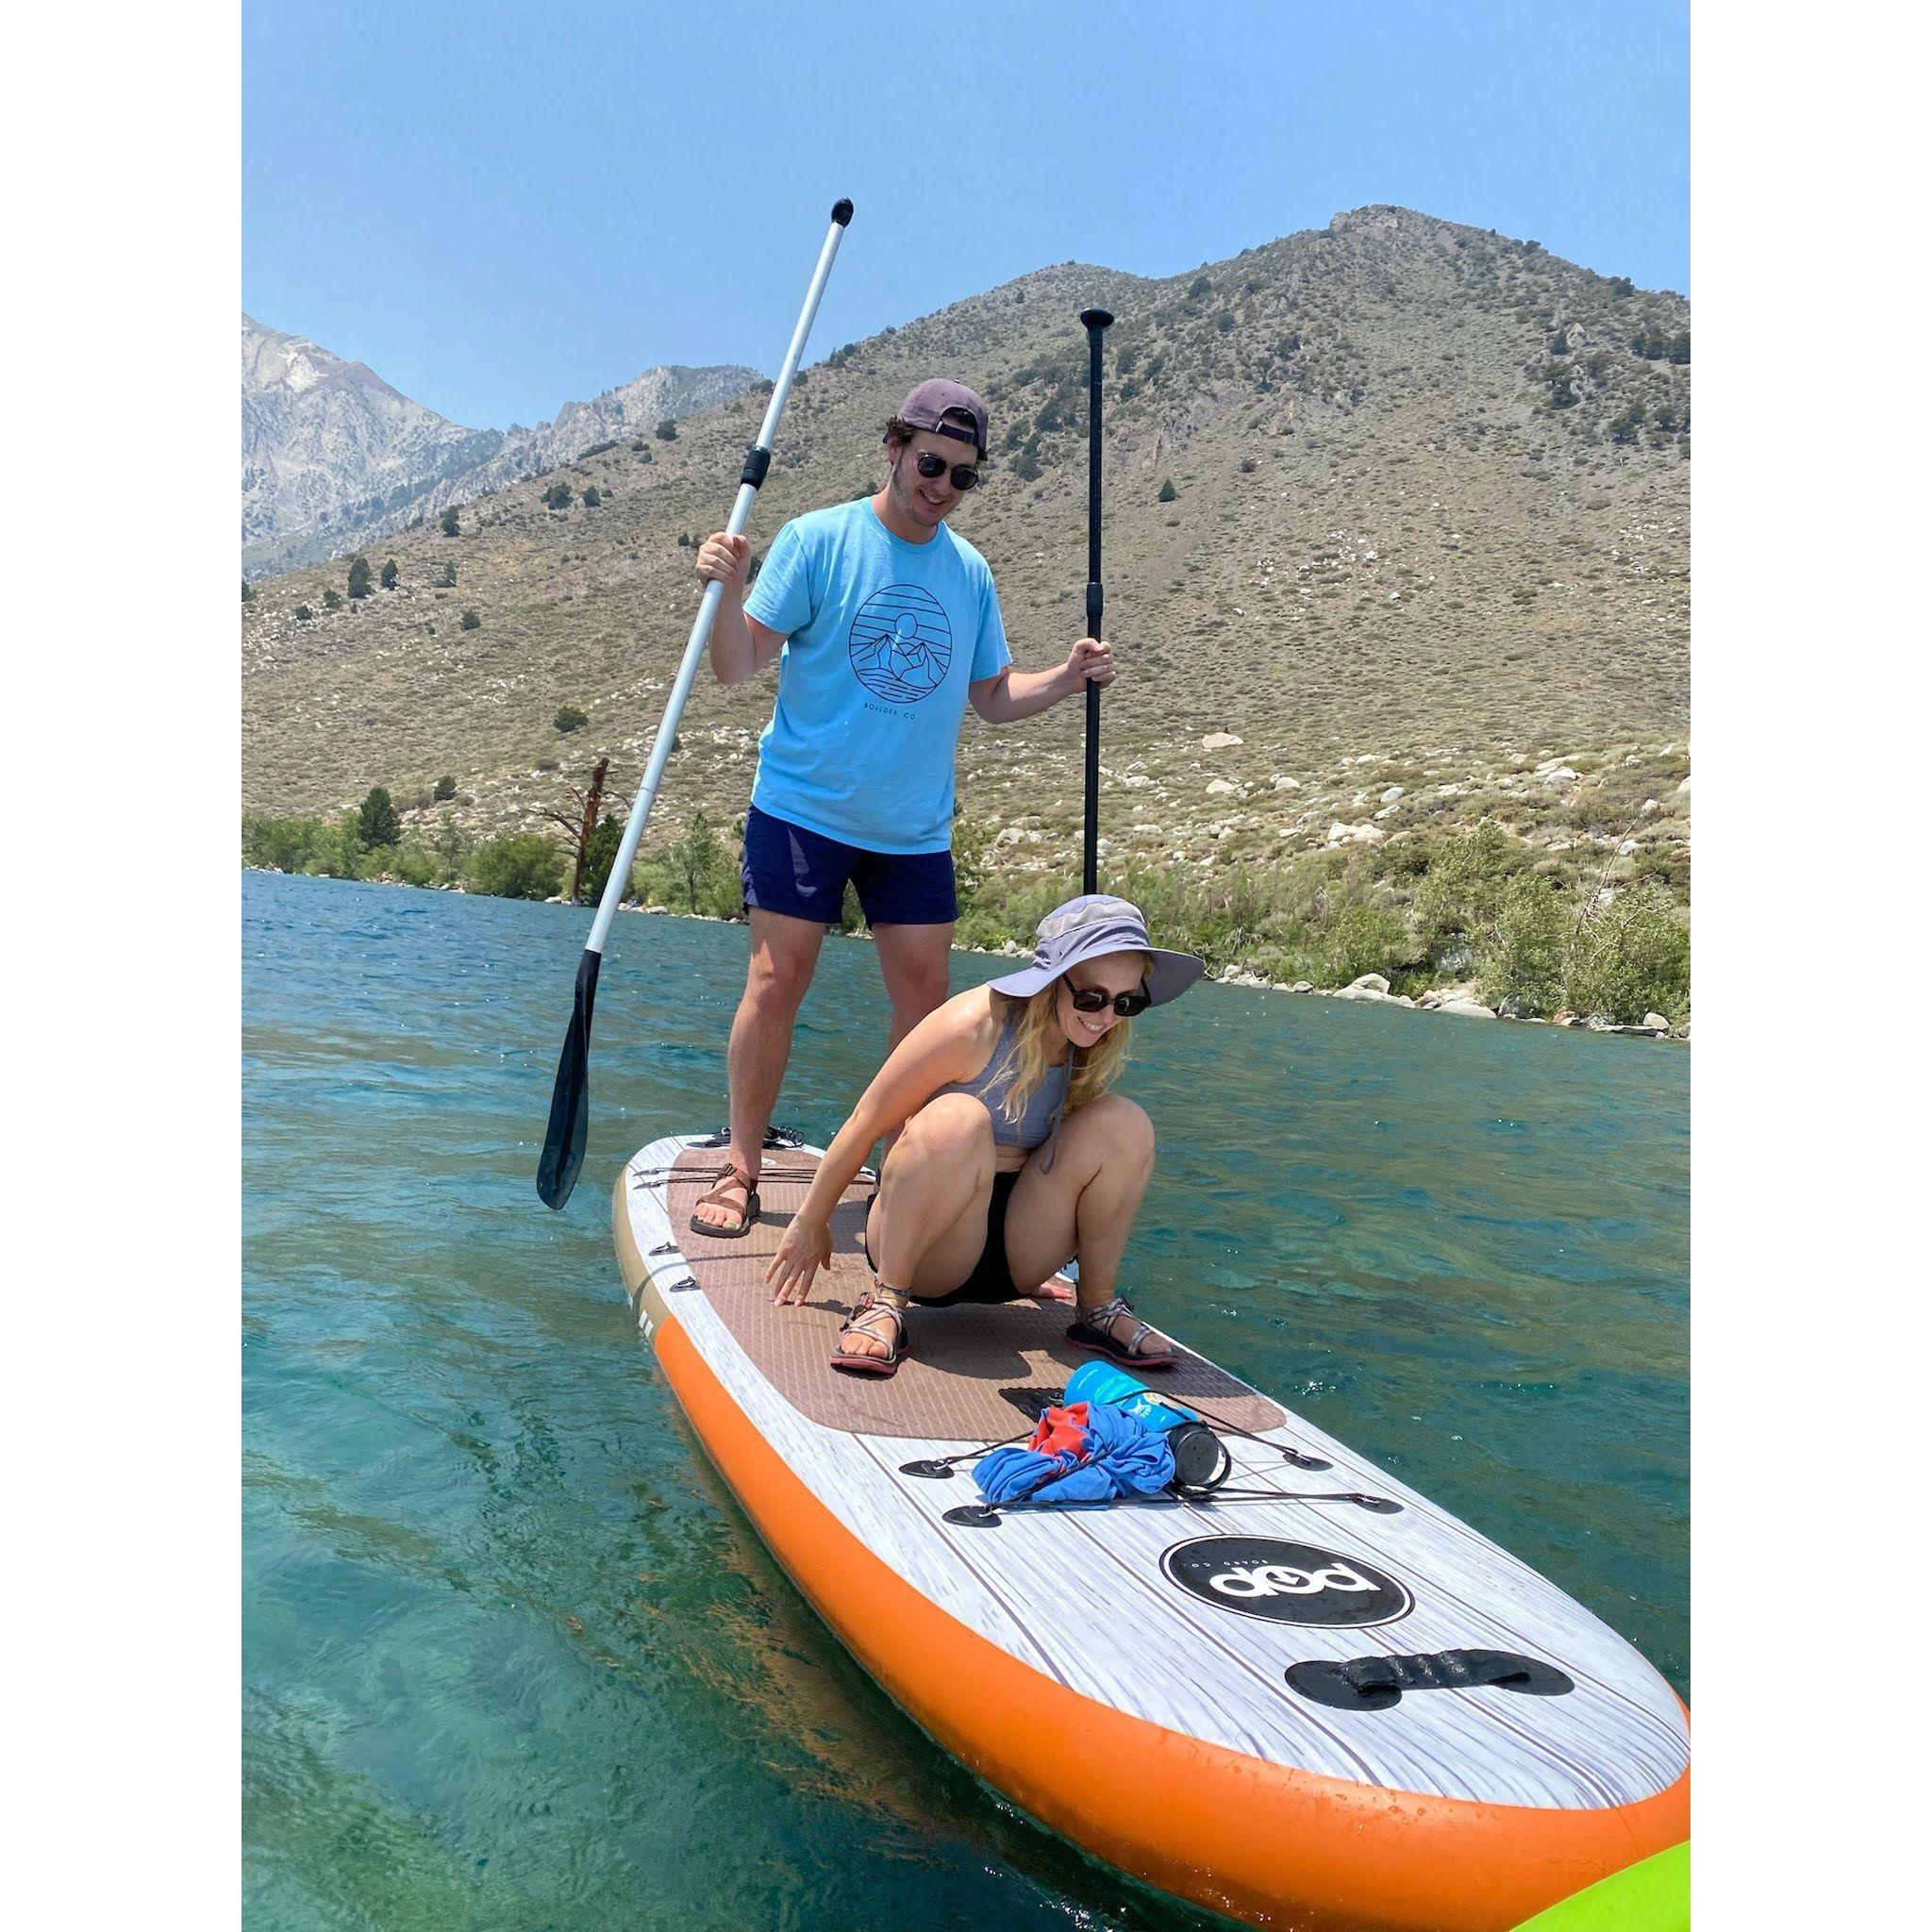 Not only did we hike, but we got to stand up paddleboard. Well, we mostly were standing...